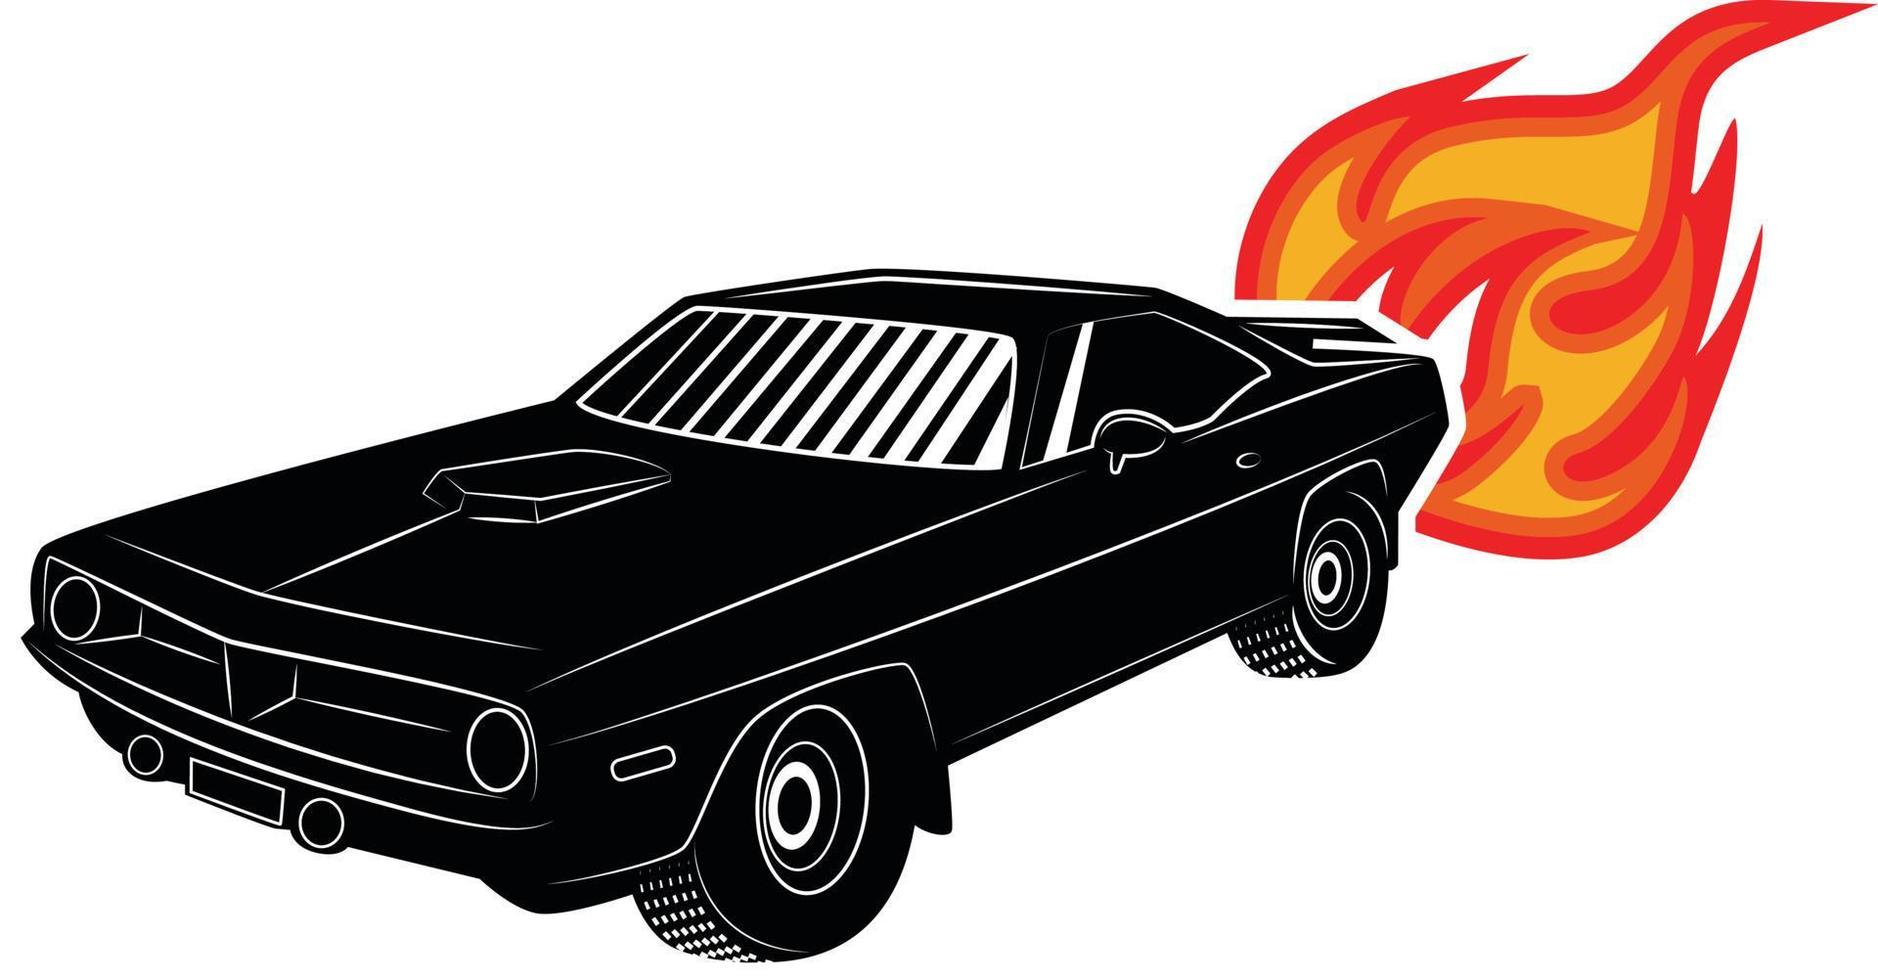 Vector Image Of A Sports Car With Exhaust Pipes On Fire